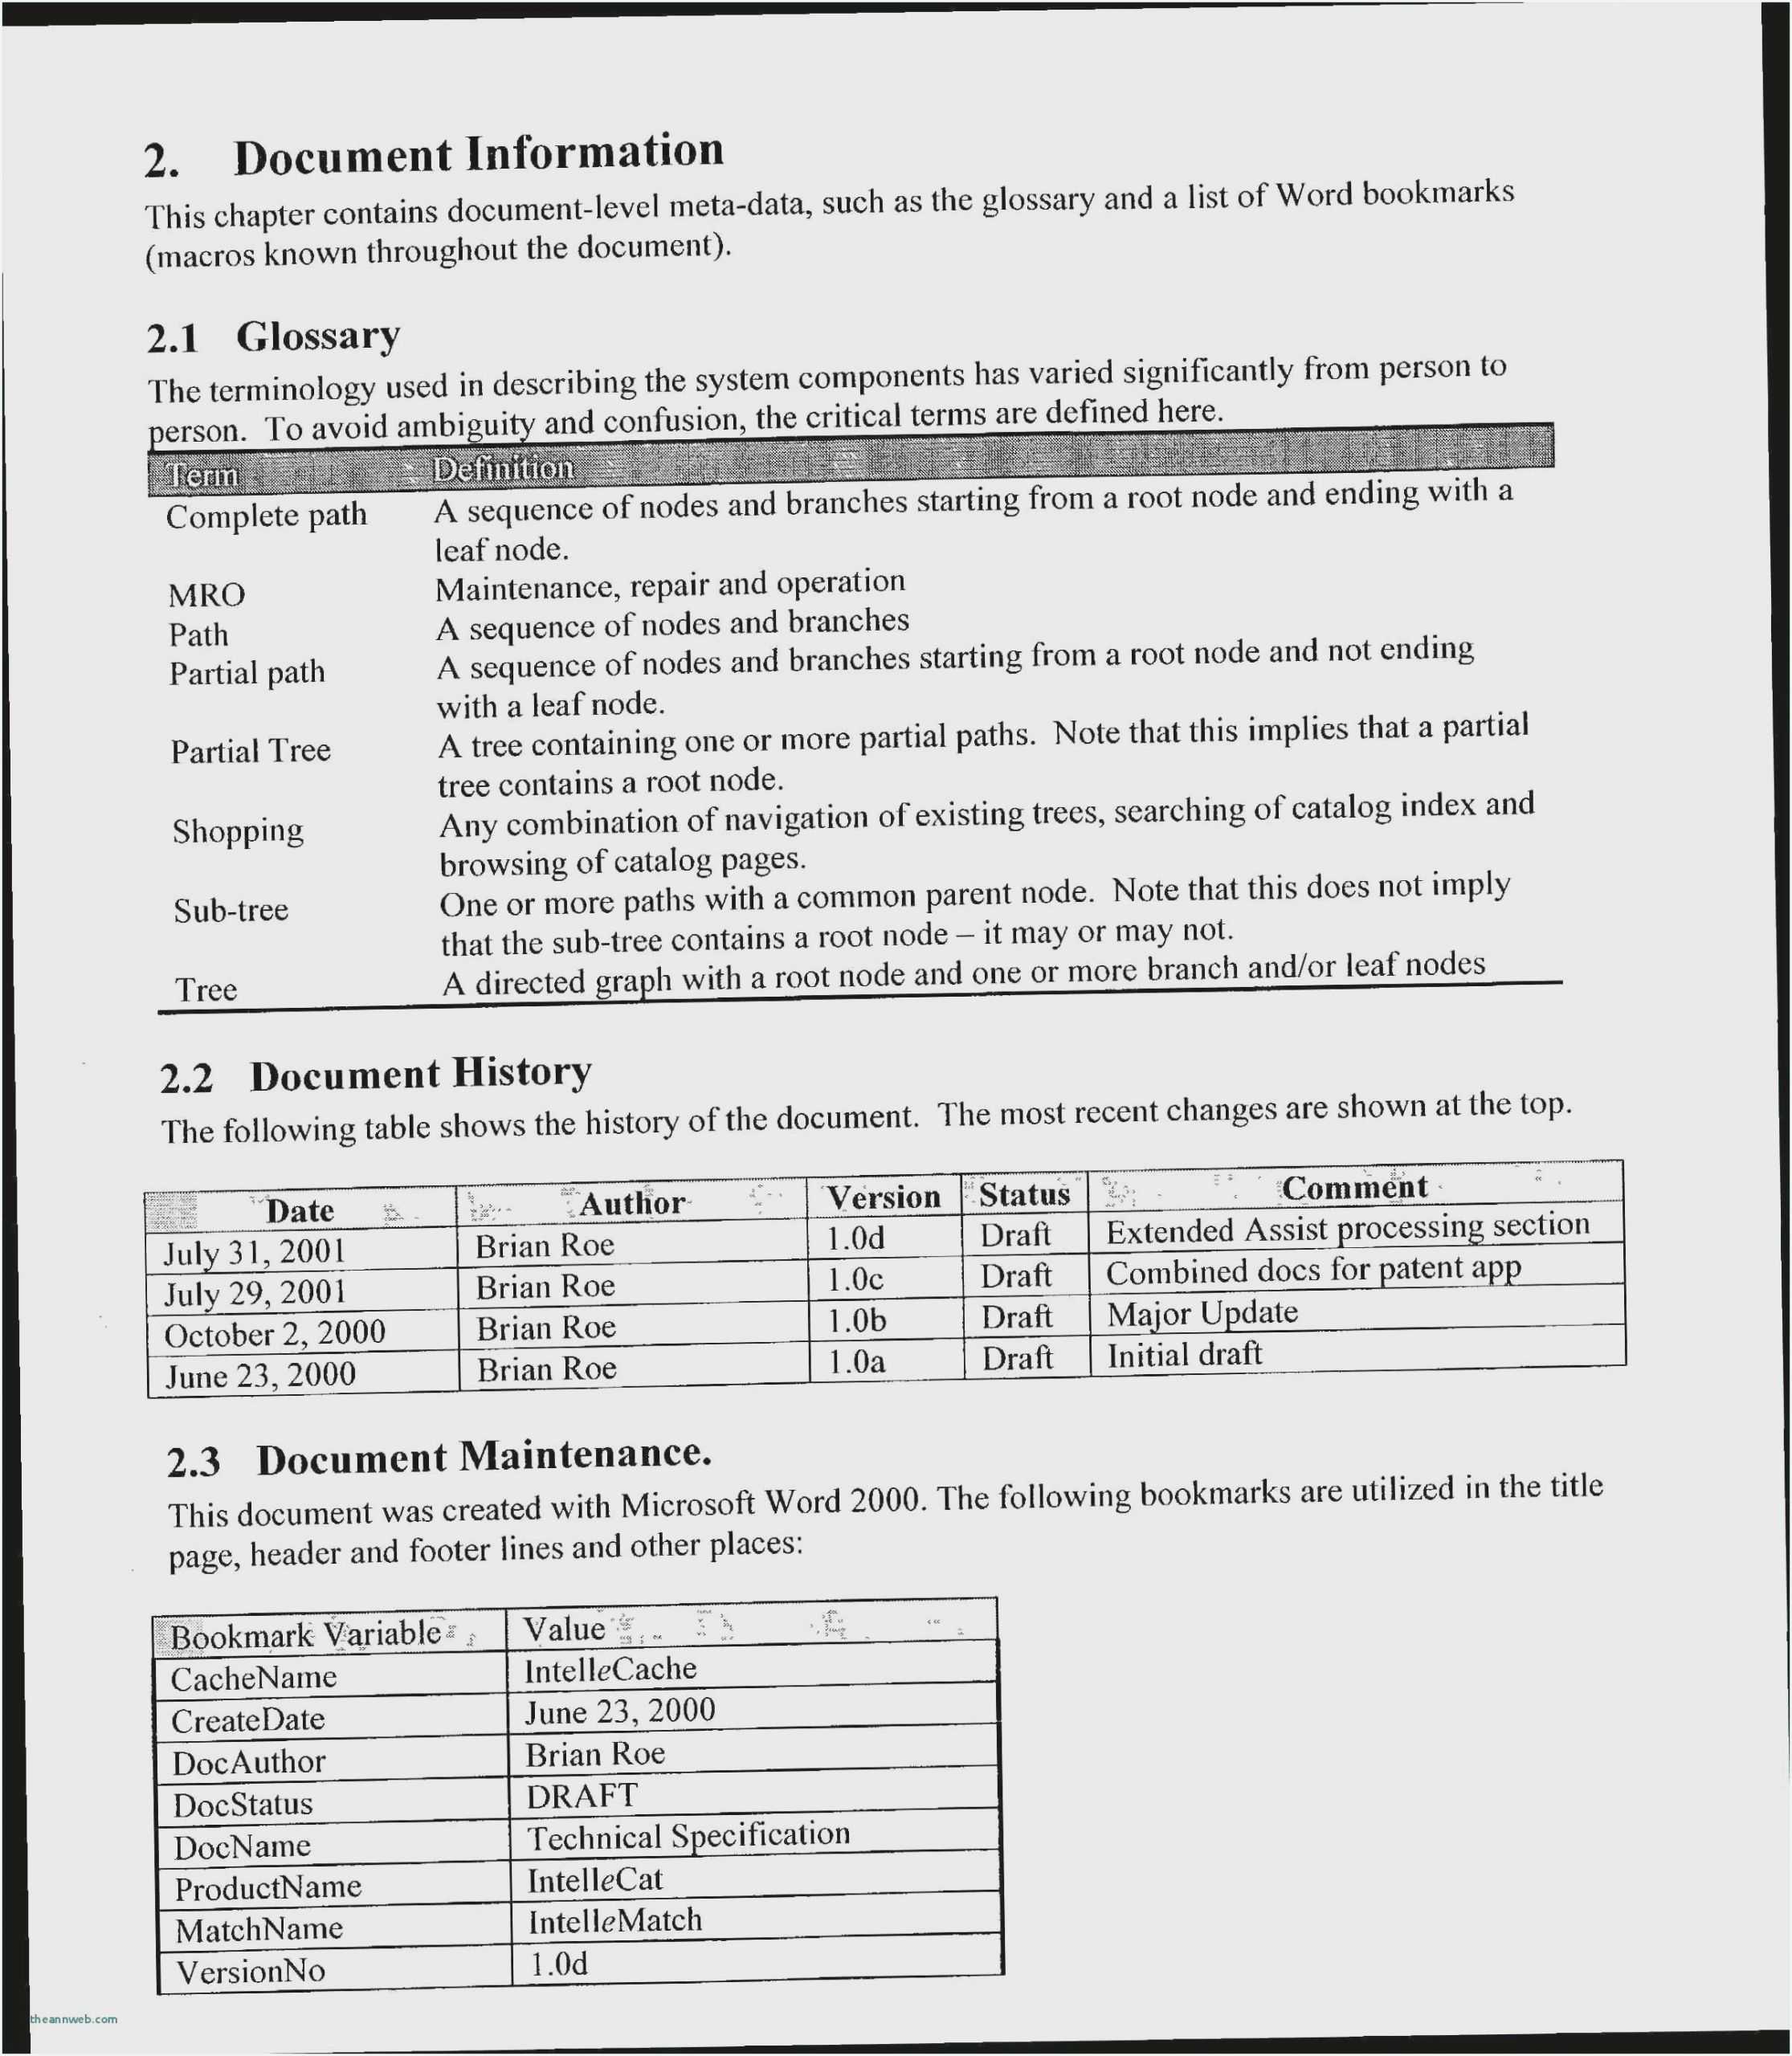 Download Resume Templates For Word 2010 - Resume Sample For Resume Templates Microsoft Word 2010